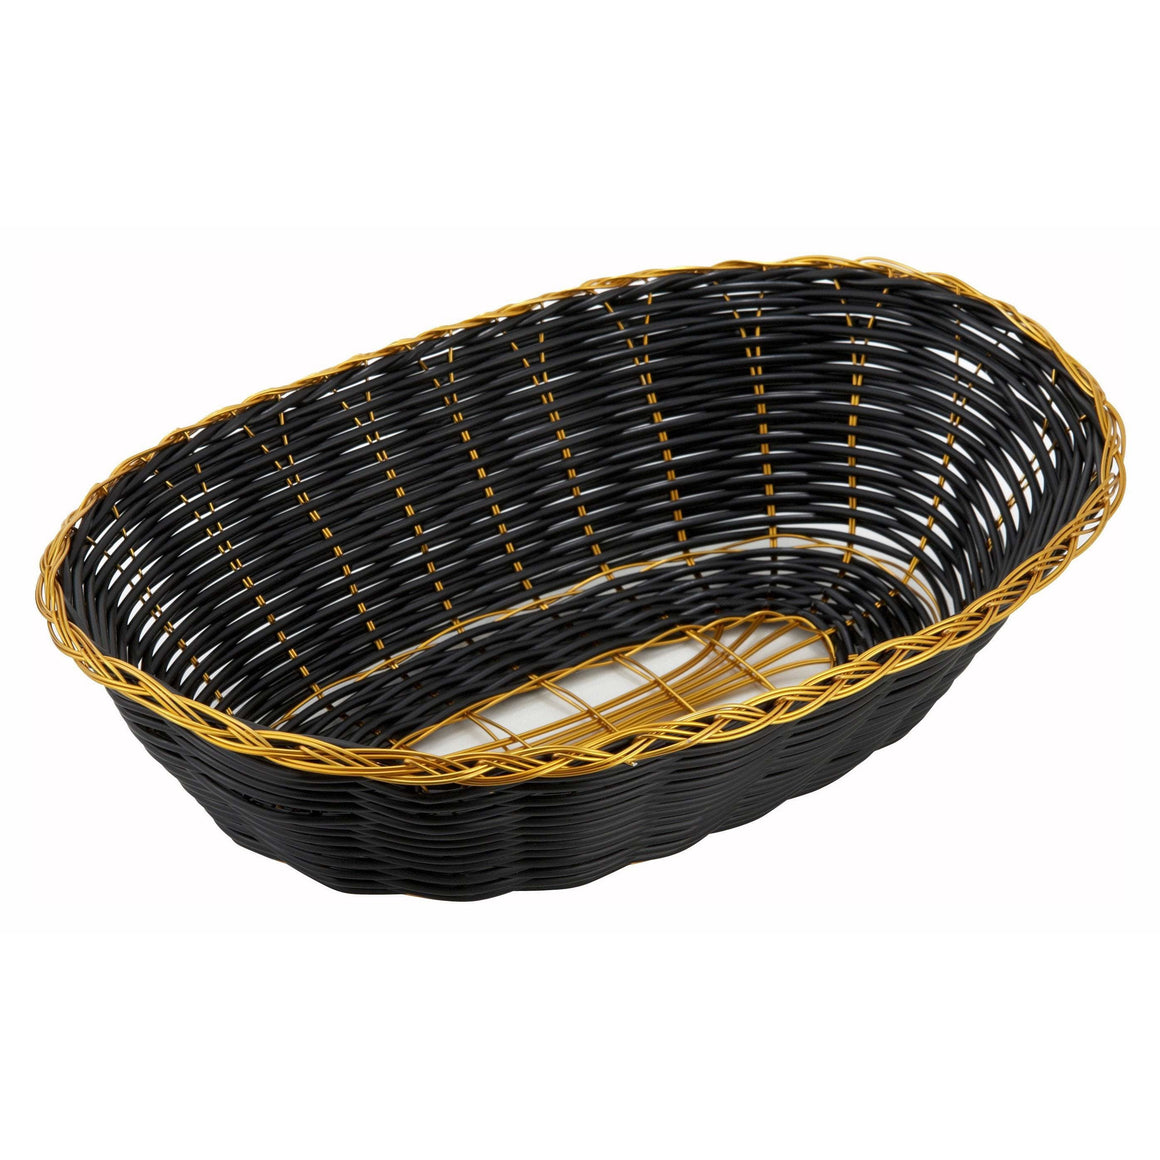 Winco - PWBK-9V - Poly Woven Baskets, Oval, 9" x 7" x 2-3/4", Black/Gold - Tabletop - Maltese & Co New and Used  restaurant Equipment 